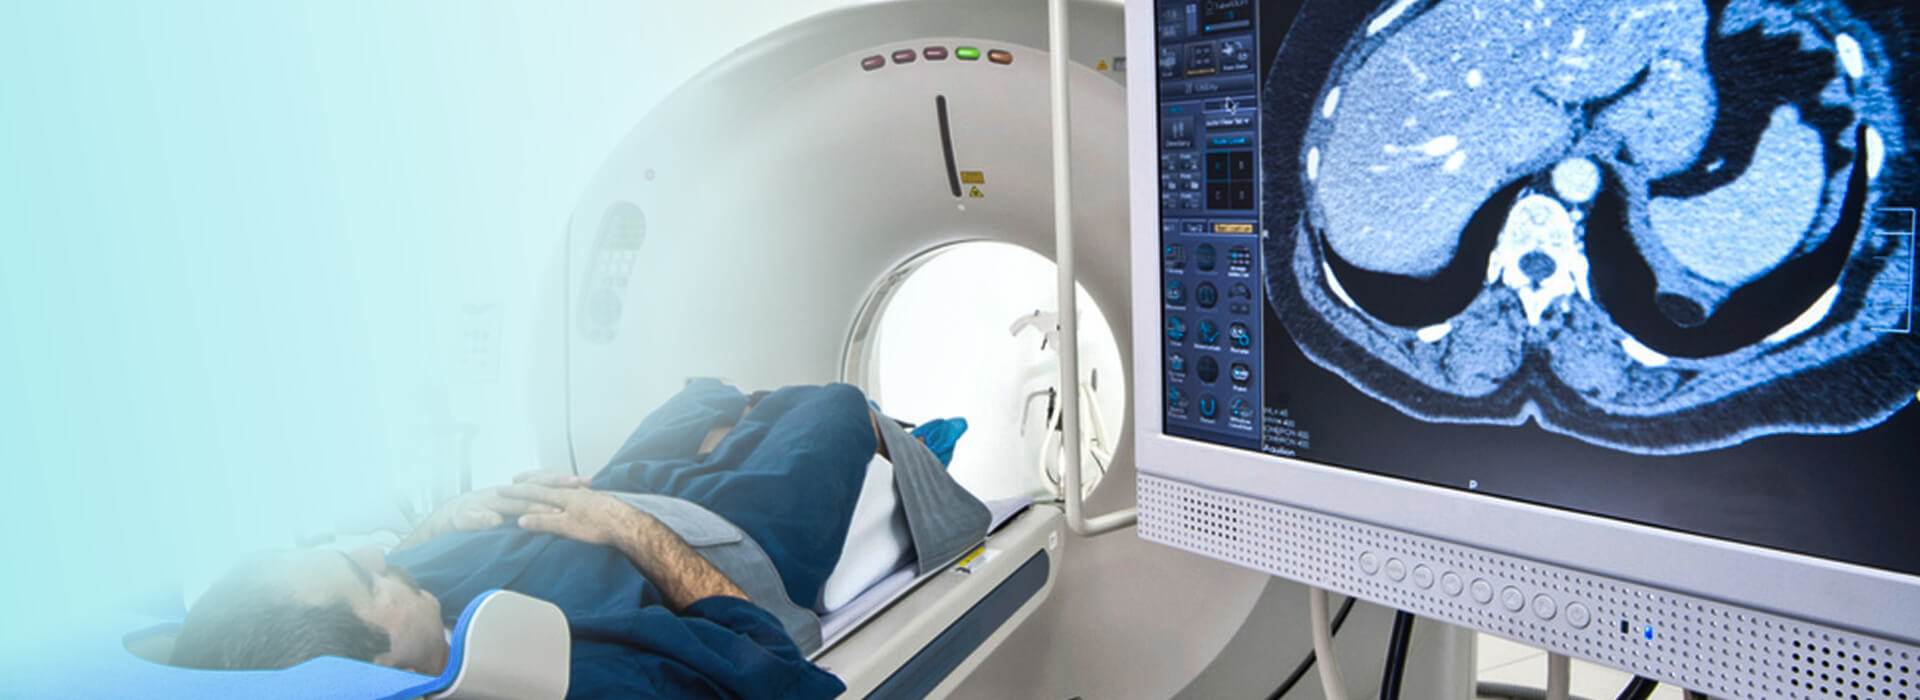 Ct Angiography in Ahmedabad, Ct scan Center in Ahmedabad, Ct scan For Cancer in Ahmedabad, Ct scan Chemotherapy in Ahmedabad, Triple Phase CT scans in Ahmedabad, Ct scan For Liver in Ahmedabad, Cect in Ahmedabad, Contrast CT scans in Ahmedabad, Trauma CT scans in Ahmedabad, Ct Colonoscopy in Ahmedabad, Ct for Liver Volume in Ahmedabad, 3 D Ct Scan in Ahmedabad